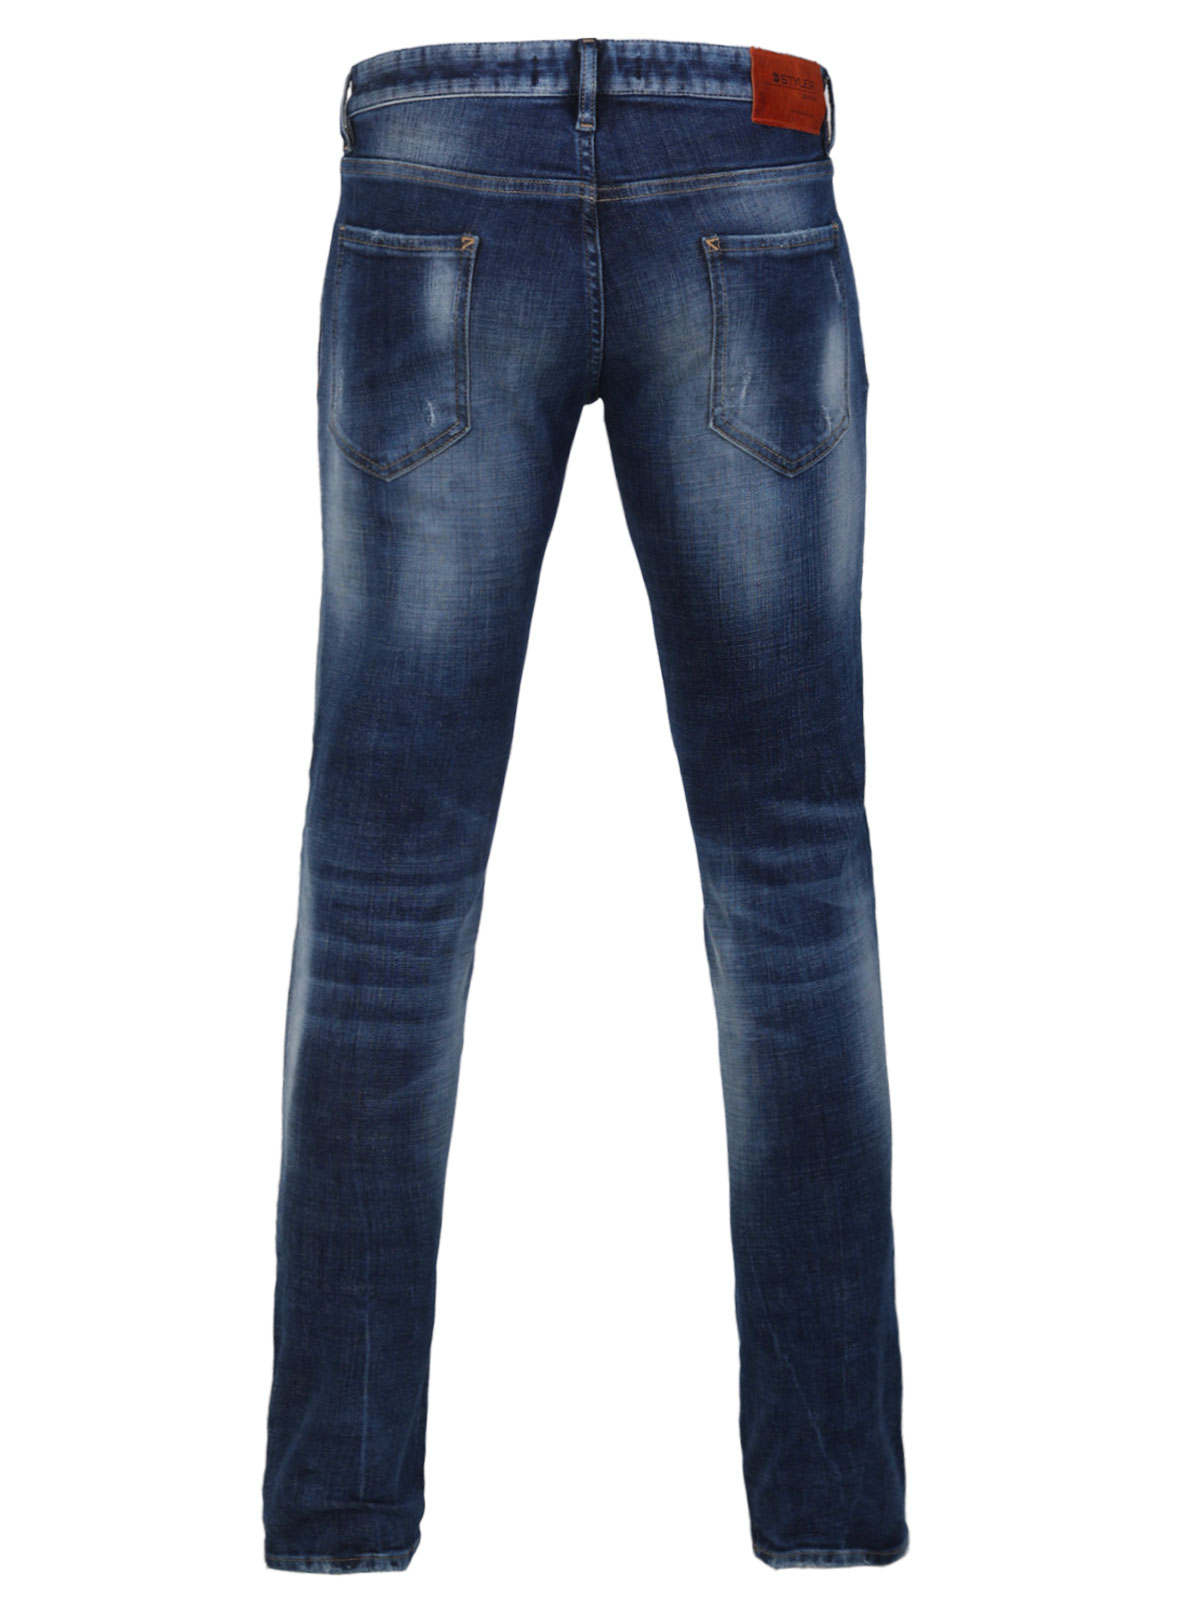 Mens jeans with a ripped effect - 62174 € 78.18 img2